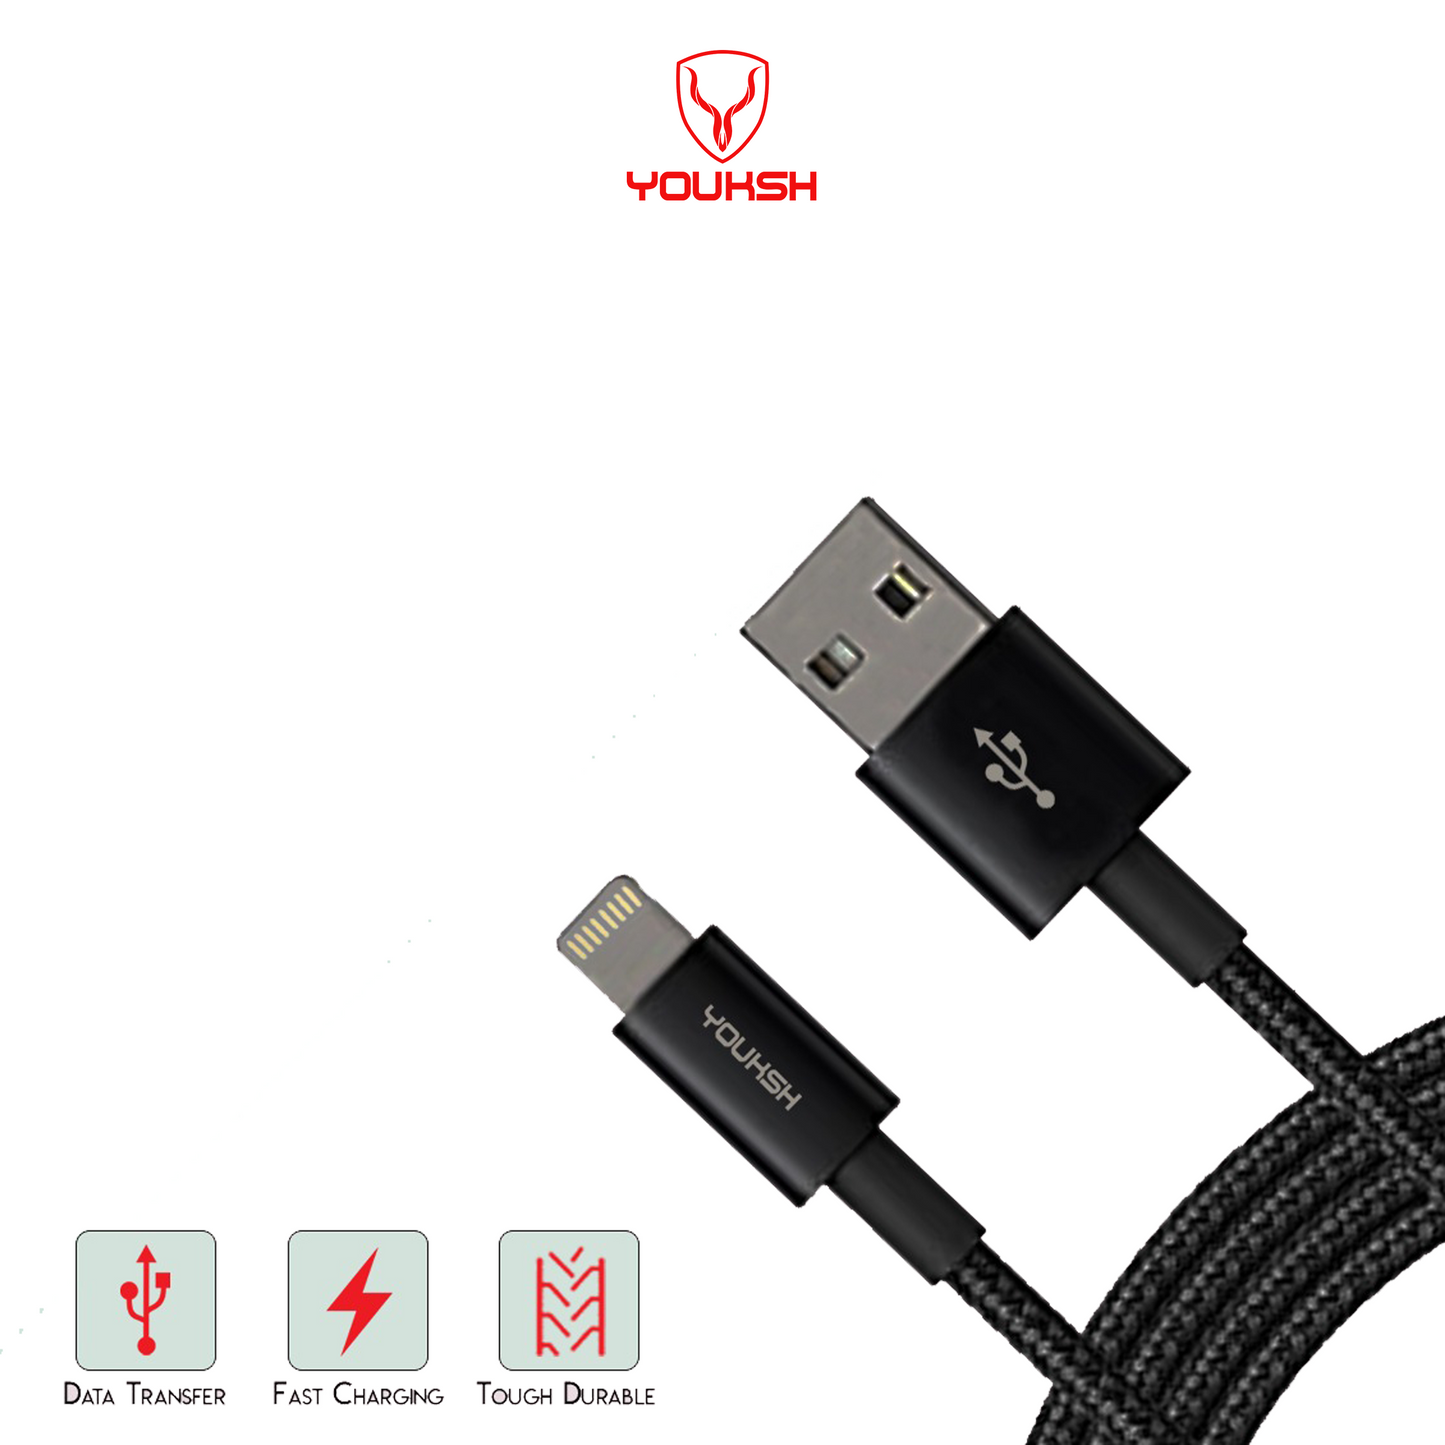 YOUKSH Mark-L Apple iPhone Data Cable - Fast Transmission - High Quailty - 1(Meter) - Non Breakable Data Cable - Iphone.